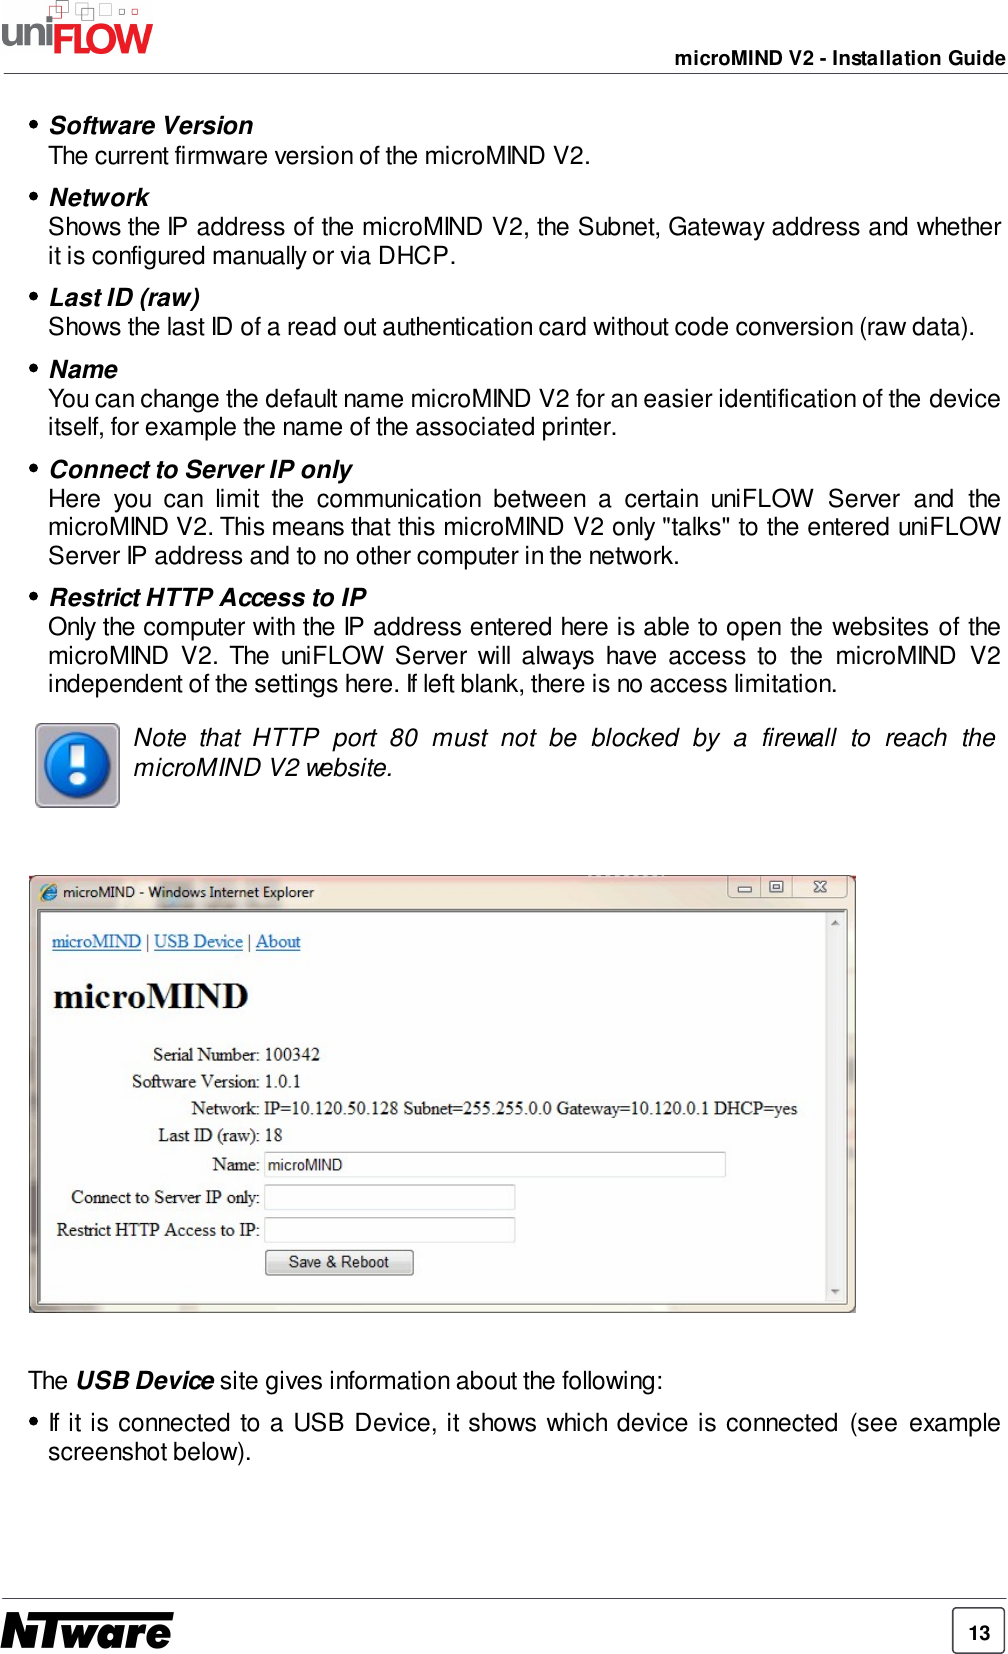 13microMIND V2 - Installation GuideSoftware VersionThe current firmware version of the microMIND V2.NetworkShows the IP address of the microMIND V2, the Subnet, Gateway address and whetherit is configured manually or via DHCP.Last ID (raw)Shows the last ID of a read out authentication card without code conversion (raw data).NameYou can change the default name microMIND V2 for an easier identification of the deviceitself, for example the name of the associated printer.Connect to Server IP onlyHere  you  can  limit  the  communication  between  a  certain  uniFLOW  Server  and  themicroMIND V2. This means that this microMIND V2 only &quot;talks&quot; to the entered uniFLOWServer IP address and to no other computer in the network.Restrict HTTP Access to IPOnly the computer with the IP address entered here is able to open the websites of themicroMIND  V2.  The  uniFLOW  Server  will  always  have  access  to  the  microMIND  V2independent of the settings here. If left blank, there is no access limitation.Note  that  HTTP  port  80  must  not  be  blocked  by  a  firewall  to  reach  themicroMIND V2 website.The USB Device site gives information about the following:If it is connected to a USB  Device, it shows which device is connected  (see  examplescreenshot below).